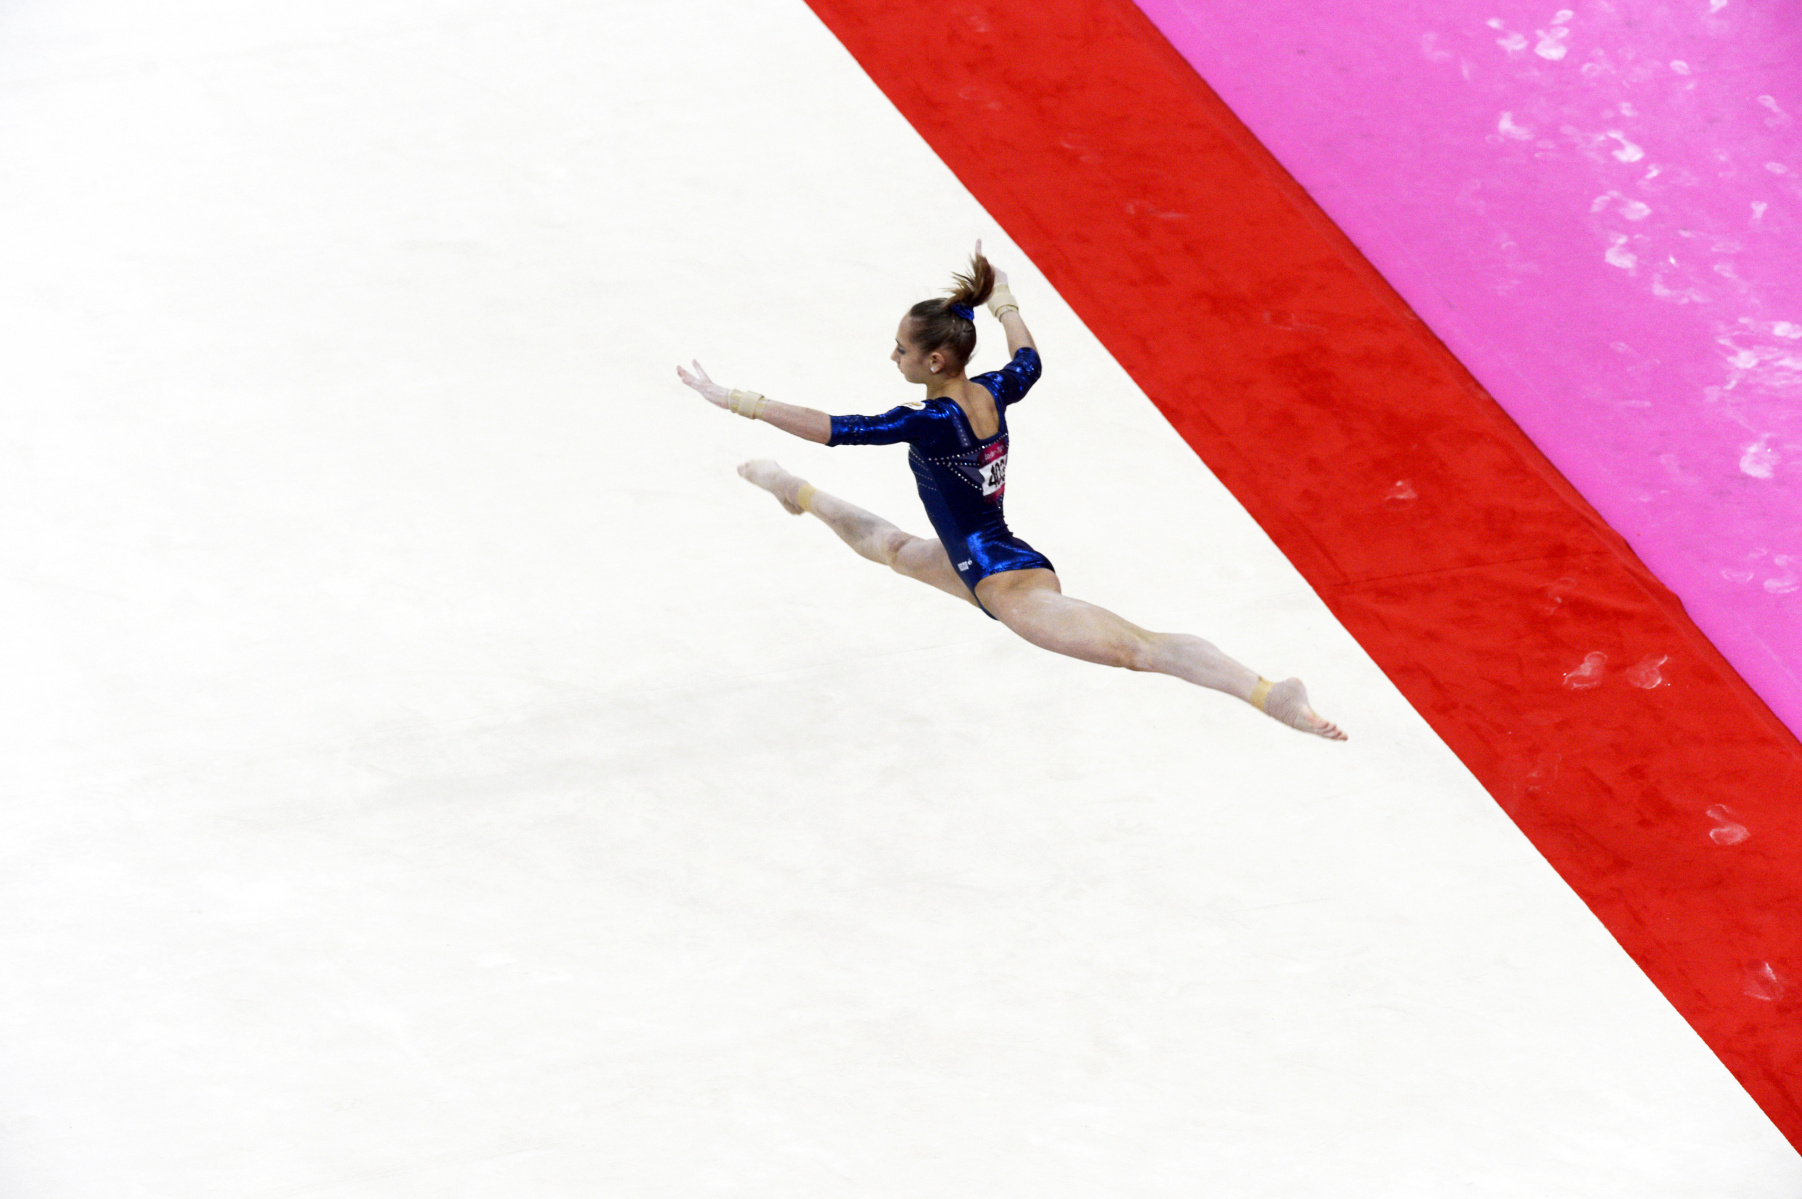 Victoria Komova of Russia performs her floor exercise during the Women's All Around Gymnastics competition during the London Olympics in which she won the silver medal. : Olympics : Photography by Adam Stoltman: Sports Photography, The Arts, Portraiture, Travel, Photojournalism and Fine Art in New York